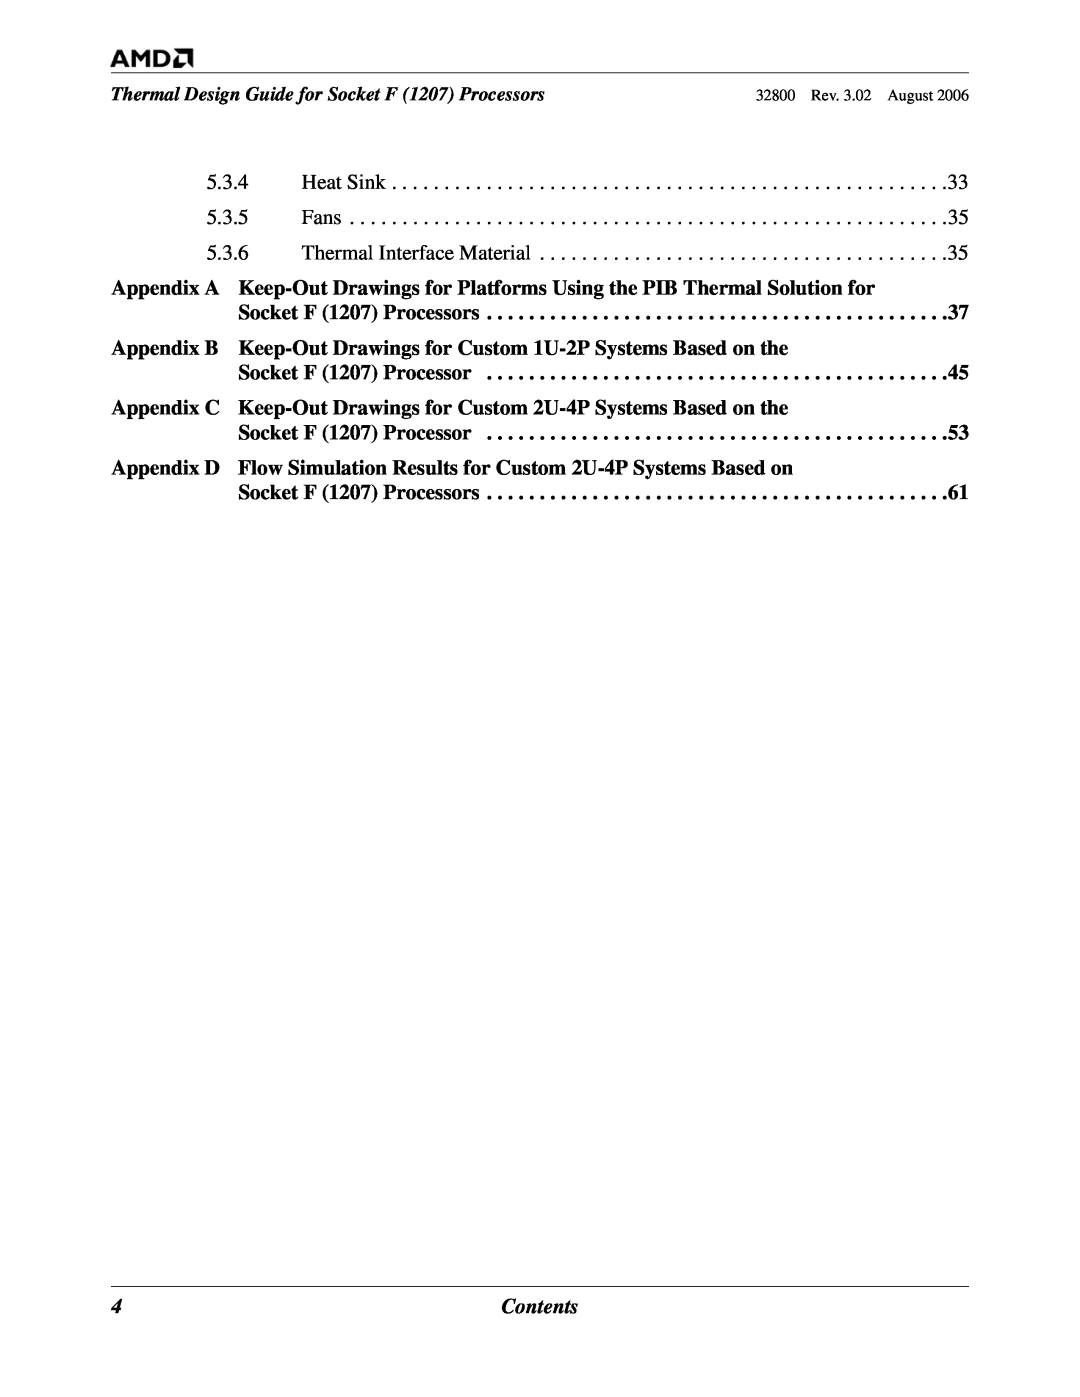 AMD manual Socket F 1207 Processors, Appendix B Keep-Out Drawings for Custom 1U-2P Systems Based on the 